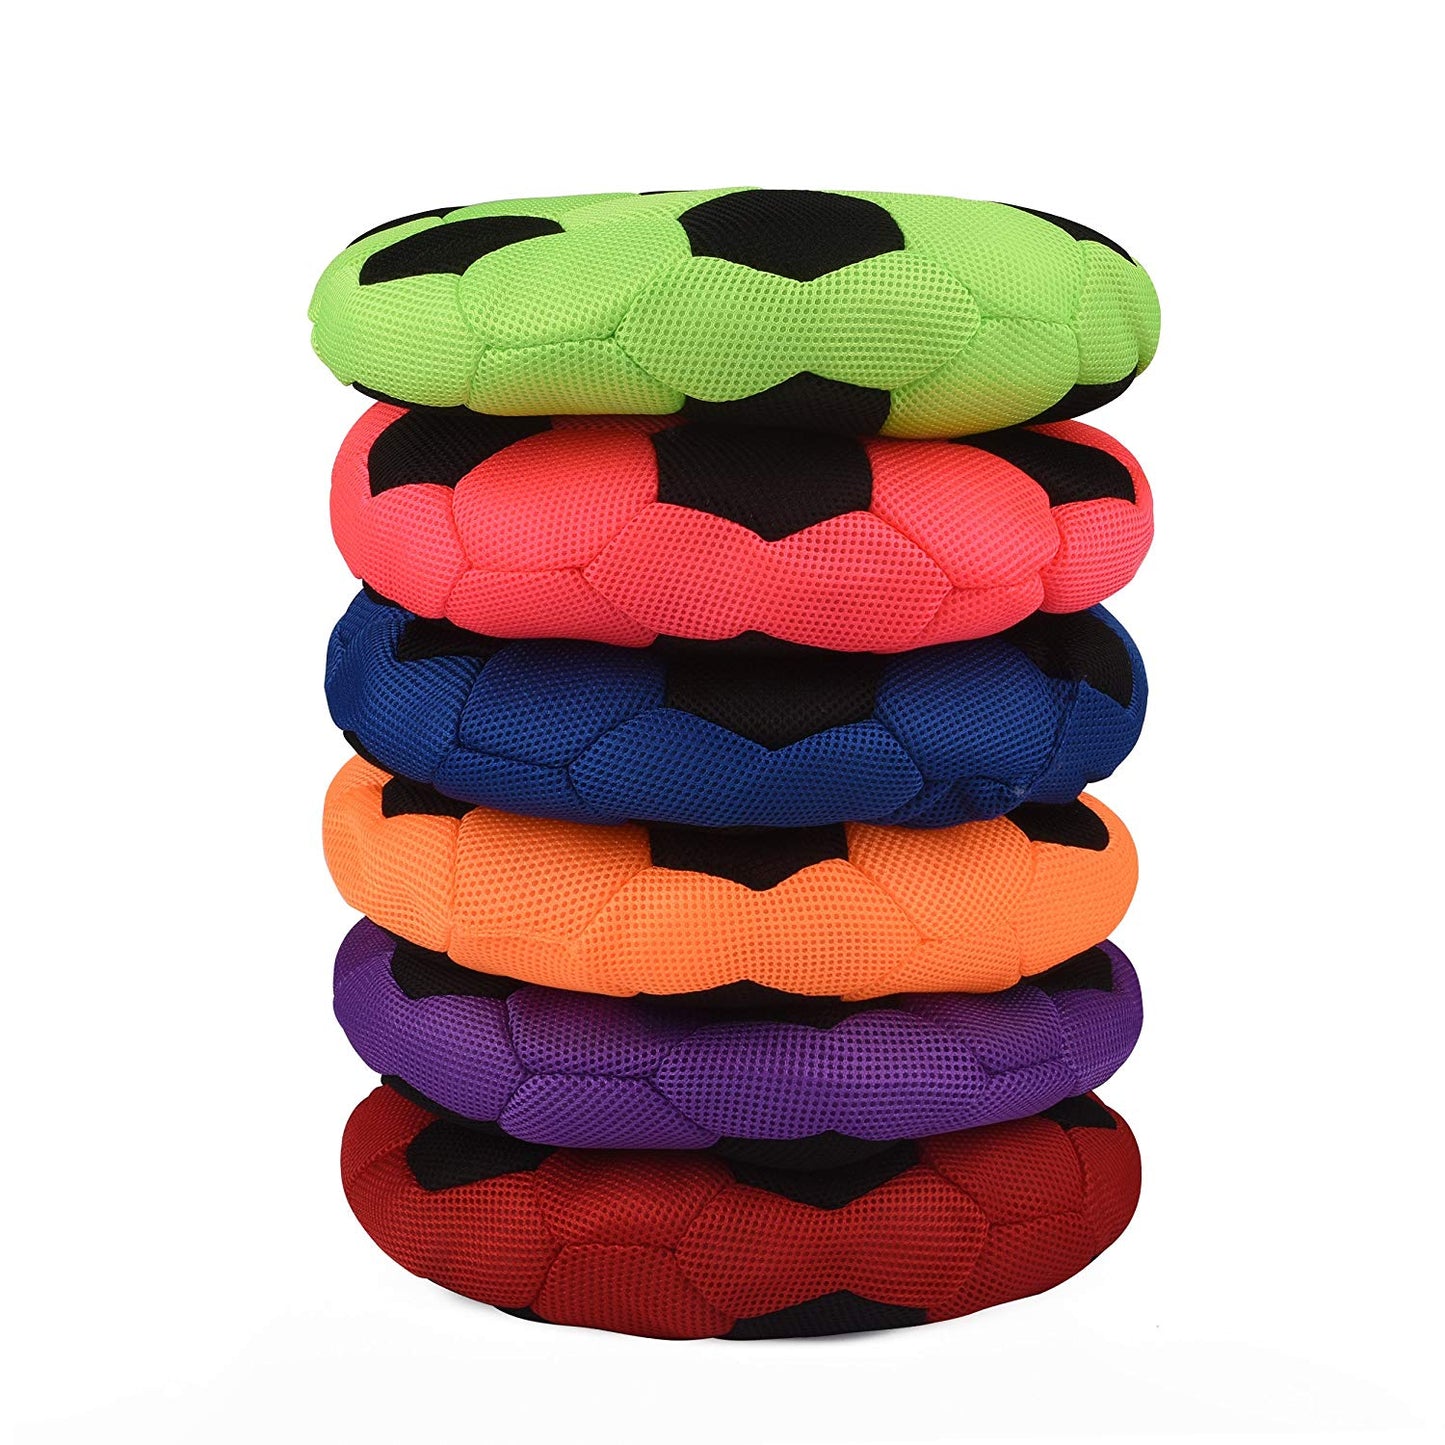 Bintiva Cushioned Spot Markers - Set of 6 Washable Seating Cues in Bright Colors - Large 14" Diameter